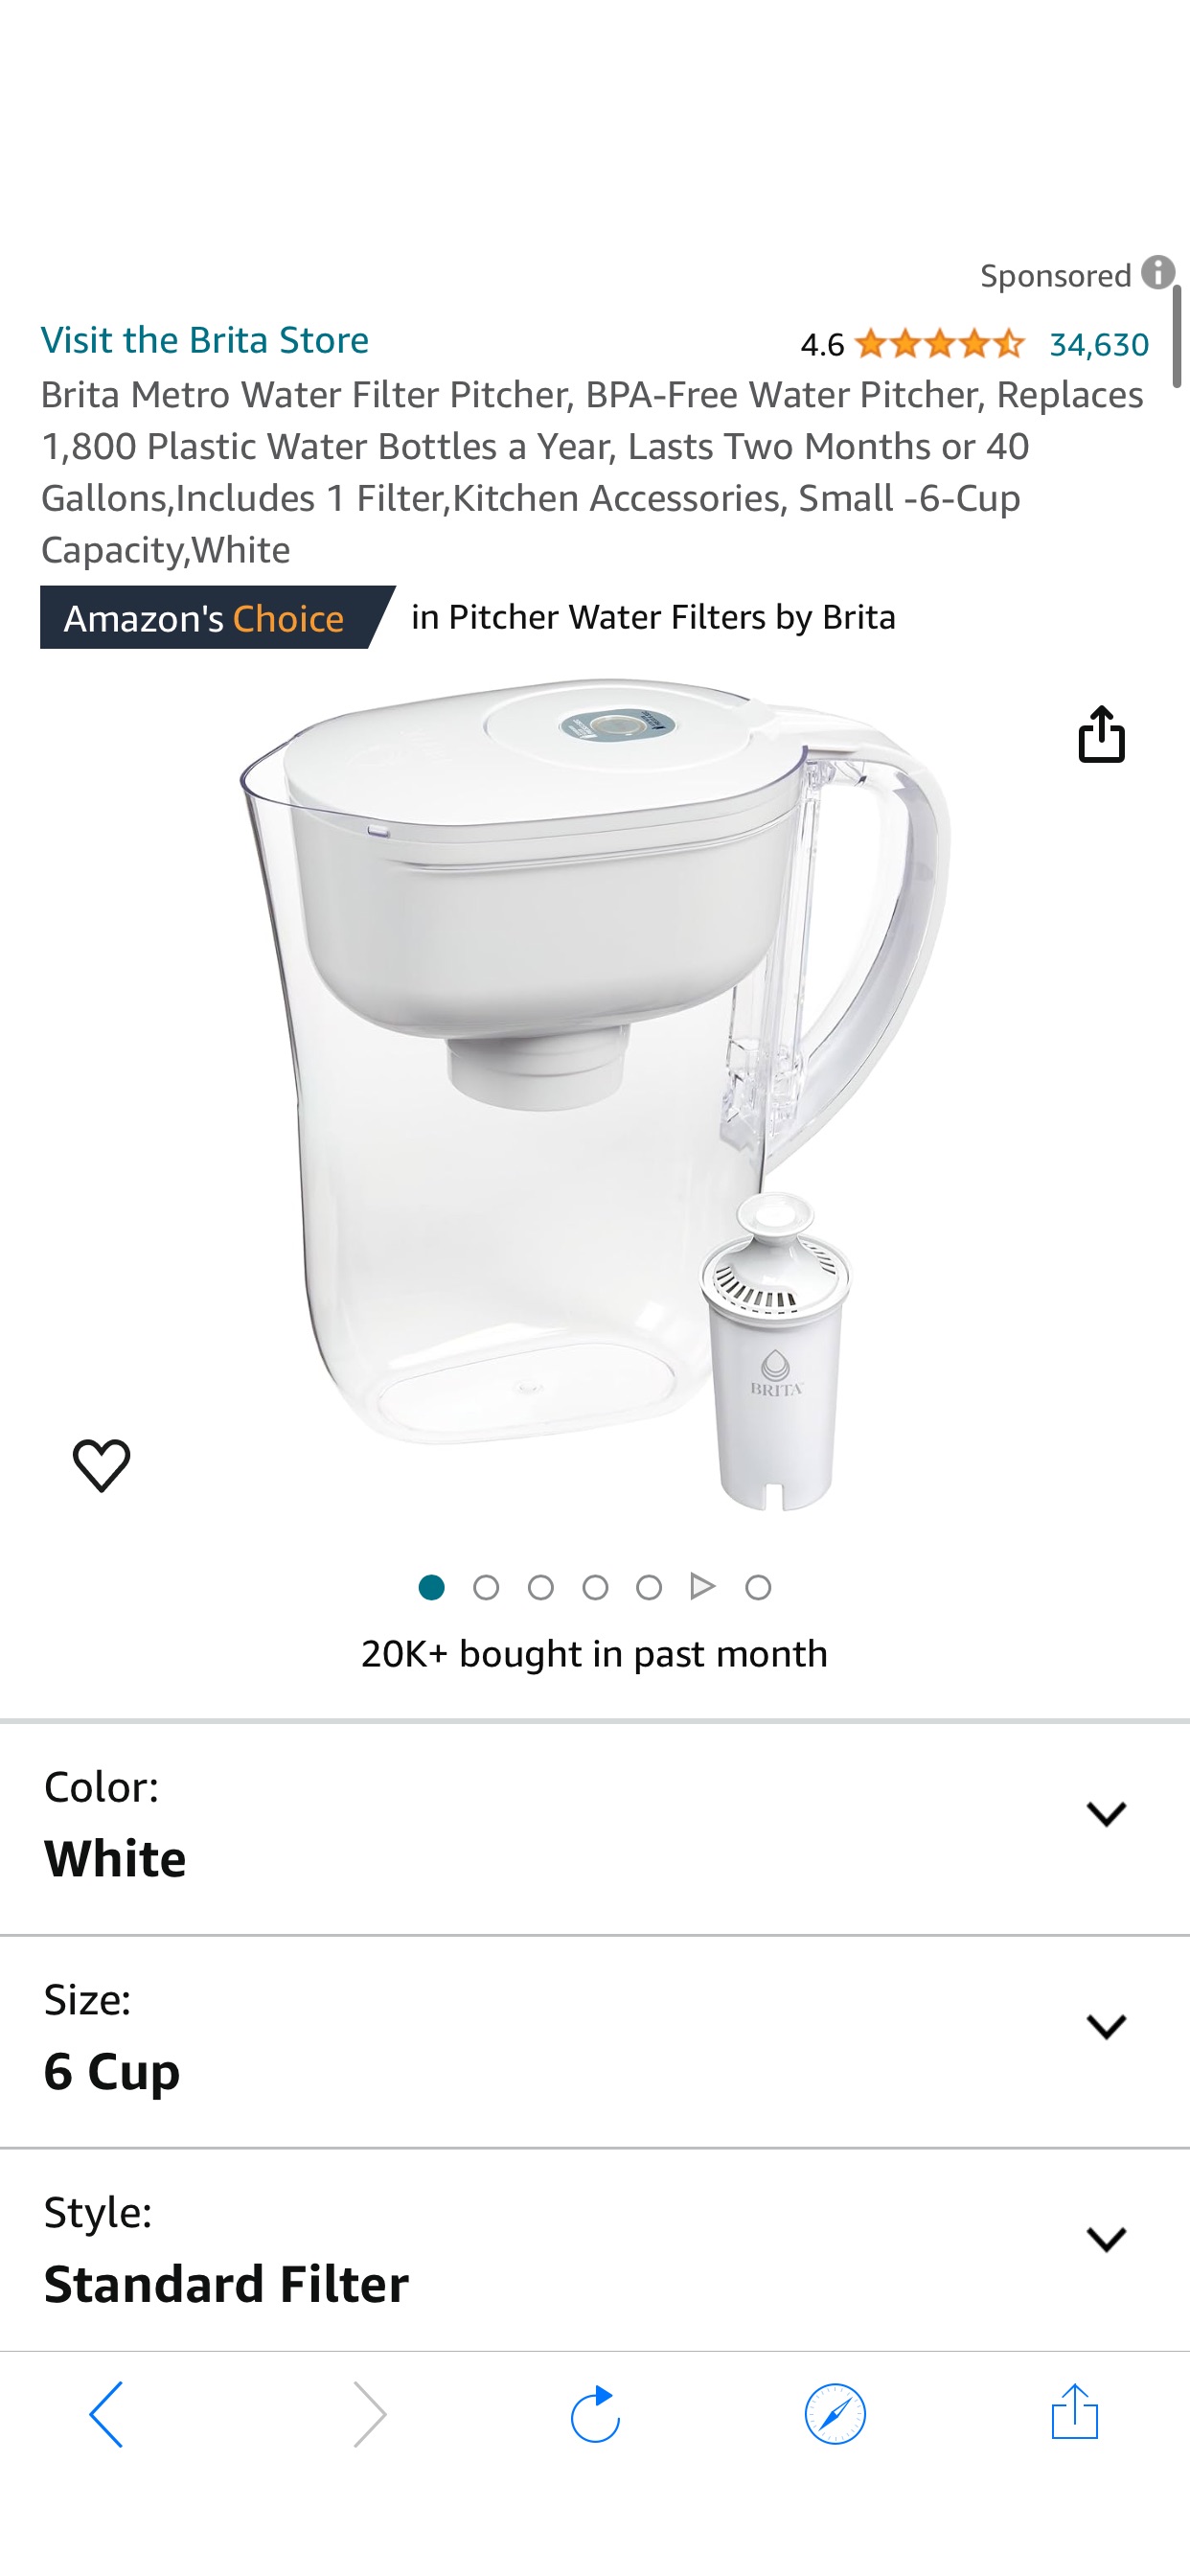 Amazon.com: Brita Metro Water Filter Pitcher, BPA-Free Water Pitcher, Replaces 1,800 Plastic Water Bottles a Year, Lasts Two Months or 40 Gallons,Includes 1 Filter,Kitchen Accessories, Small -6-Cup Ca